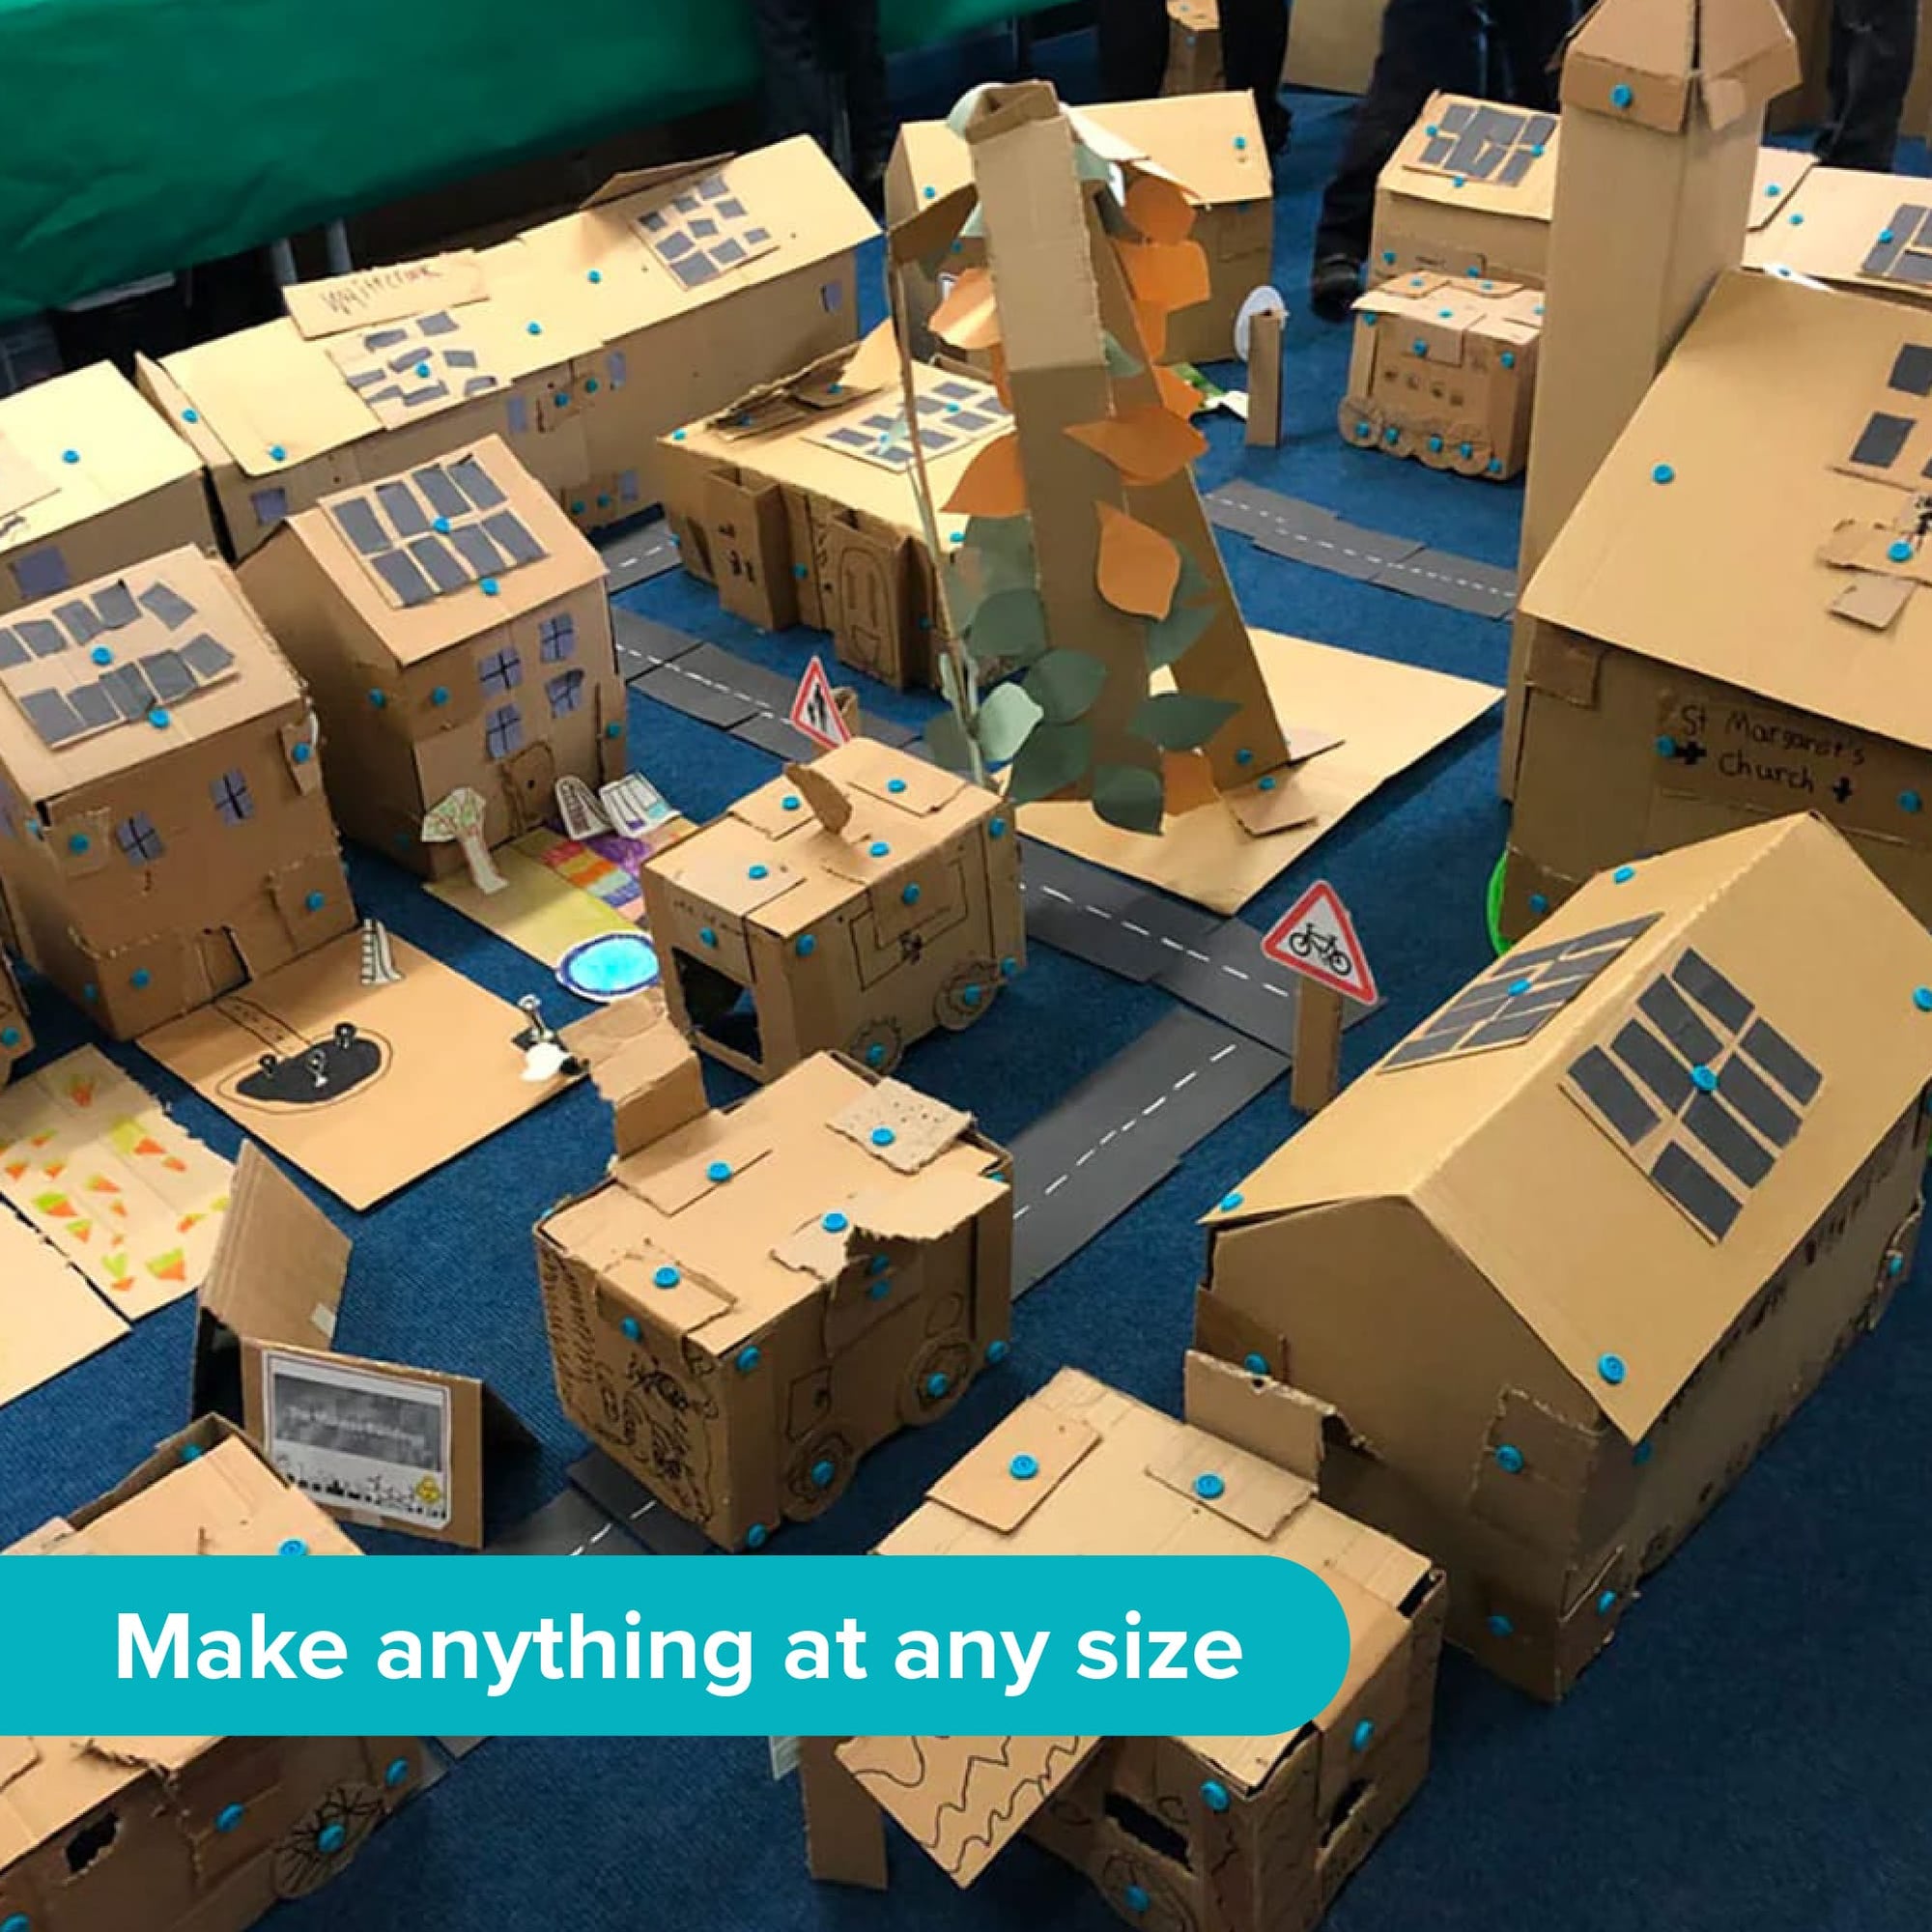 Makedo on X: Here is a fun idea for first-time makers - create 2D